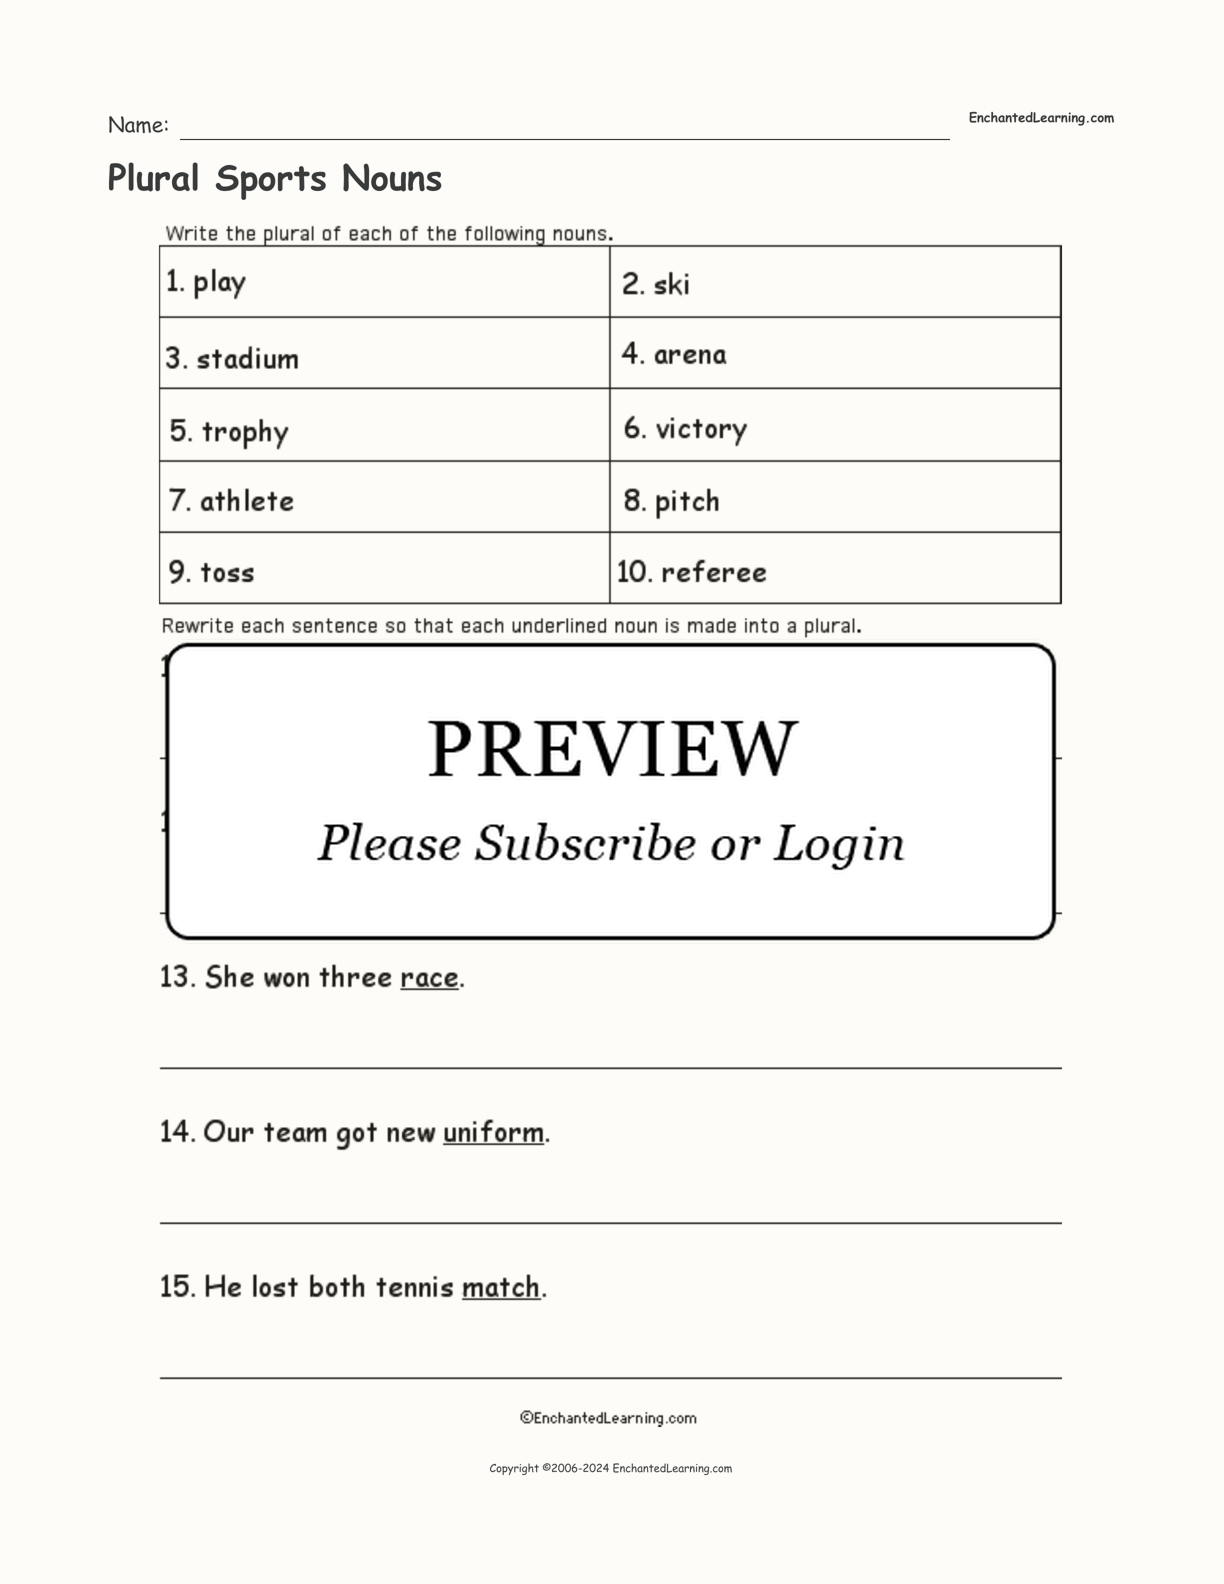 Plural Sports Nouns interactive worksheet page 1